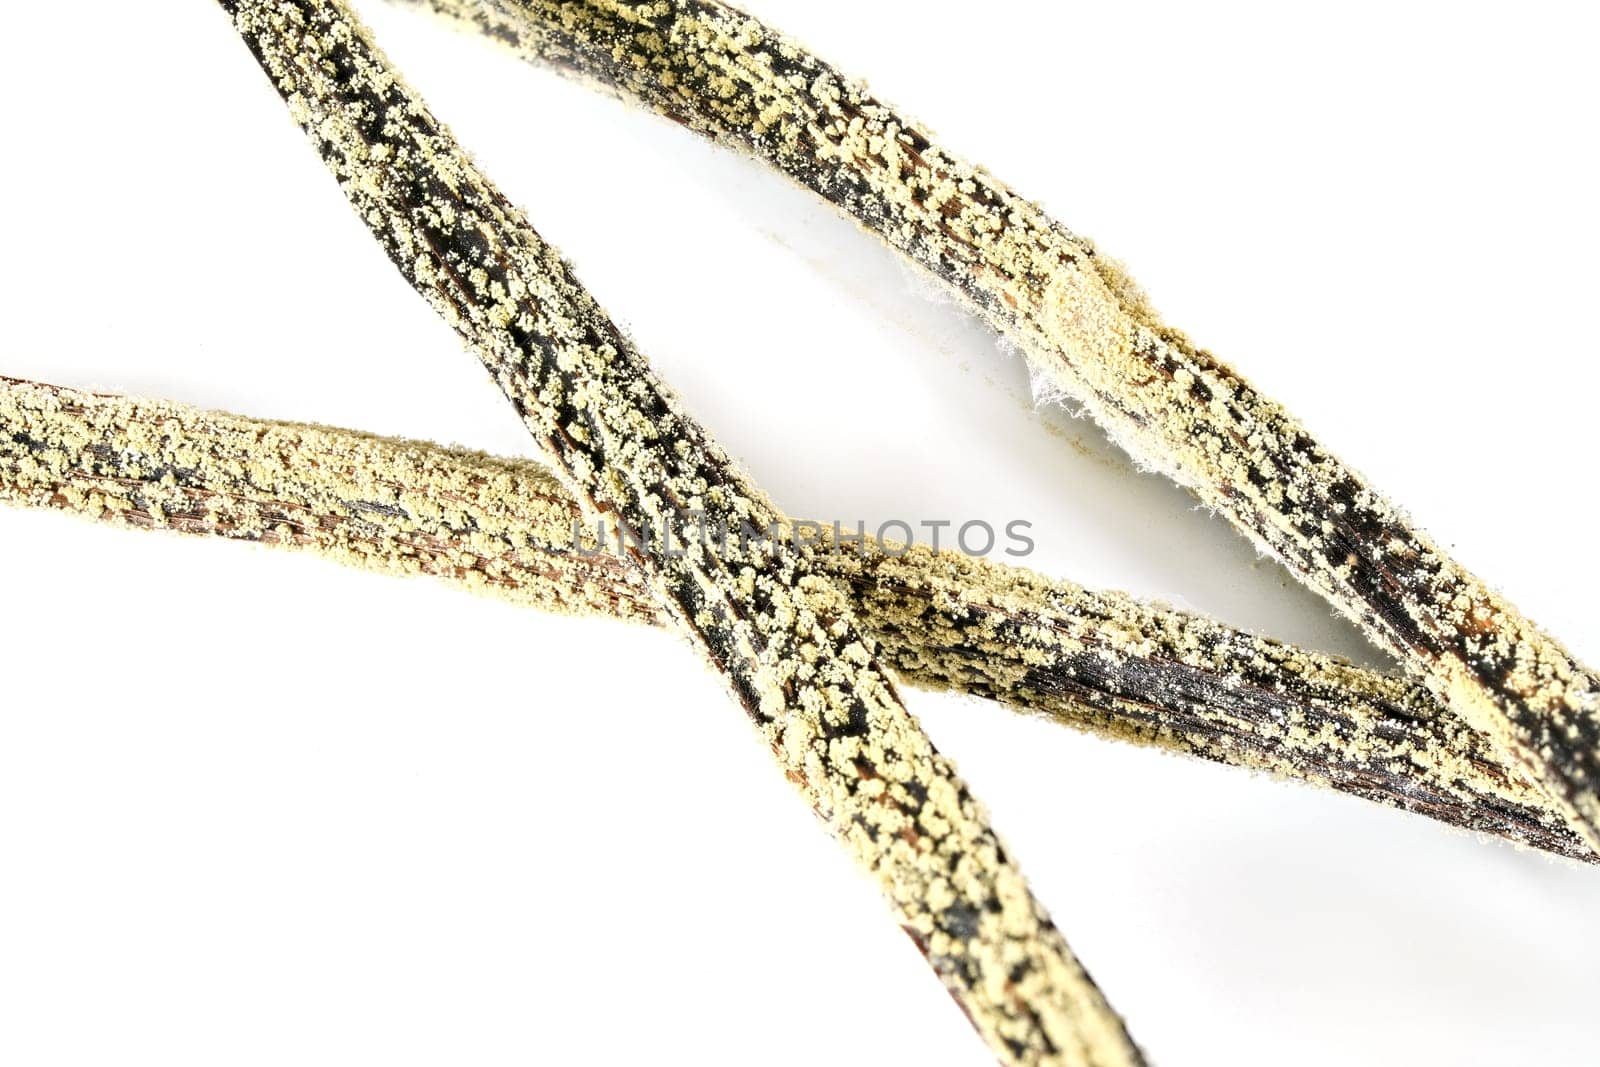 White / yellow mould or mildew growing on vanilla sticks stored improperly in wet and cold fridge - close up detail photo isolated on white background by Ivanko